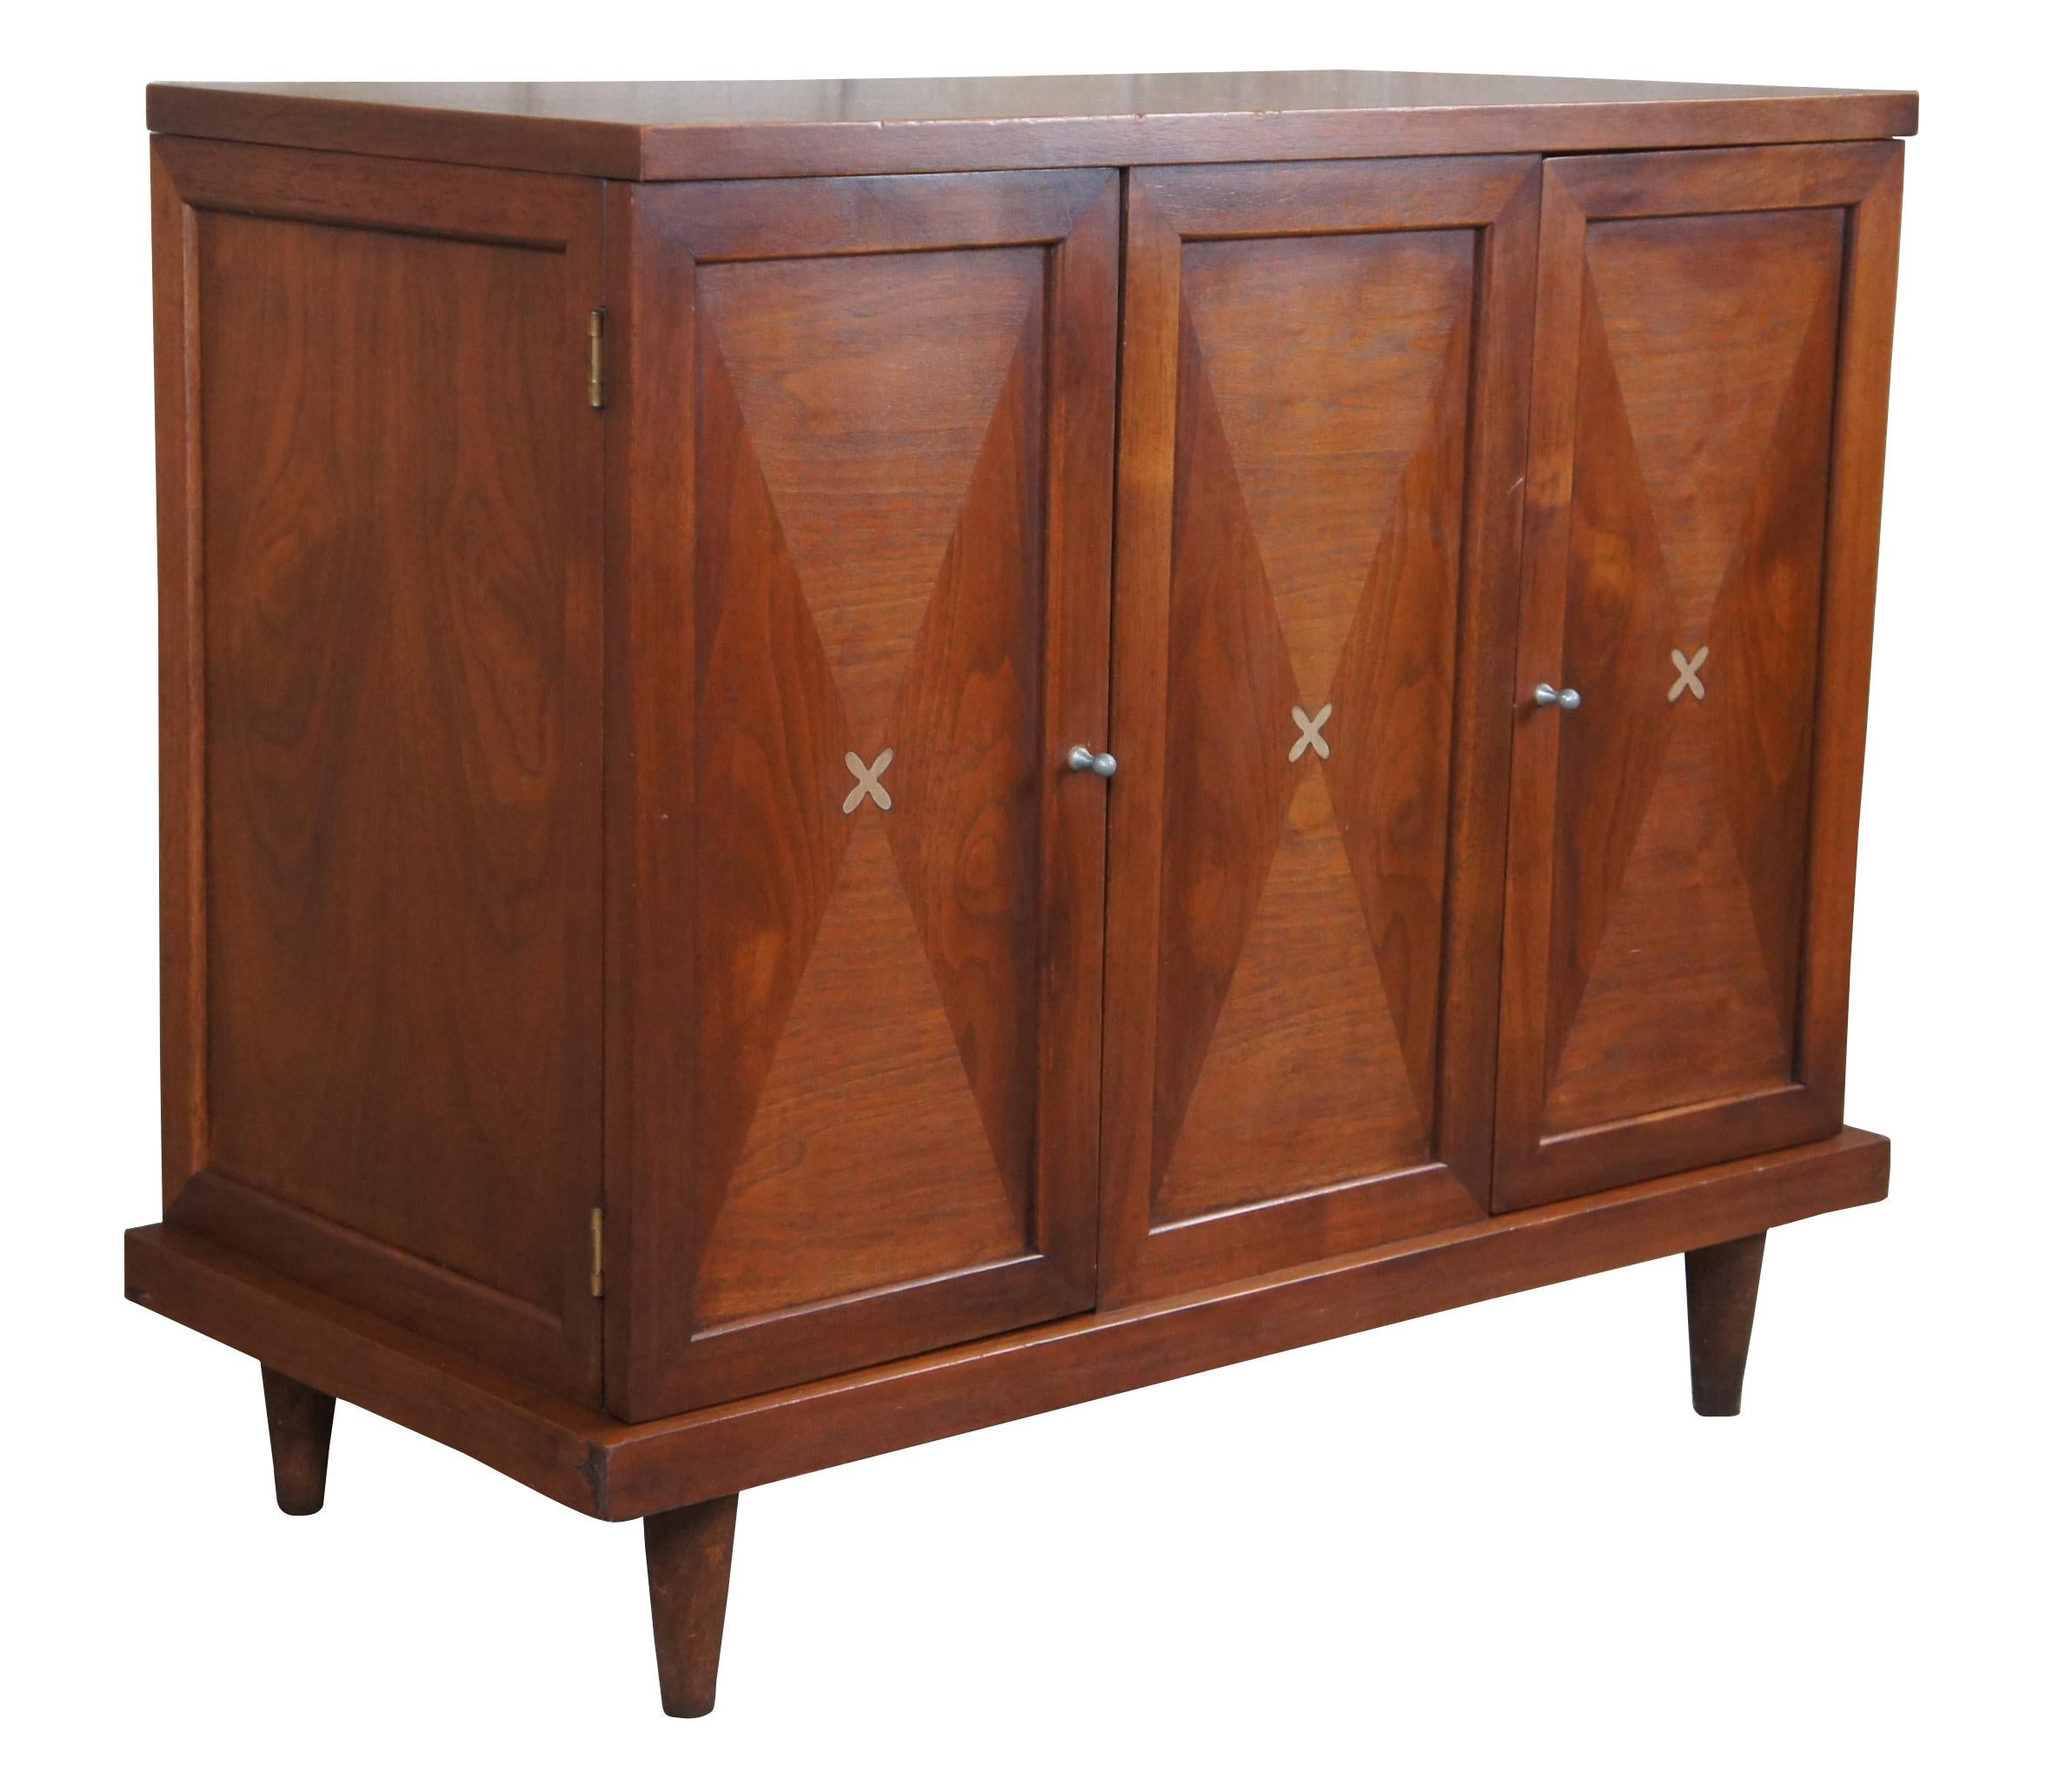 Mid-Century Modern Accord chest designed by Merton Gershun for American of Martinsville, no 3759. A rectangular form with a plinth base raised over turned and tapered legs. Made of walnut featuring matchbook veneered inset panelled front with